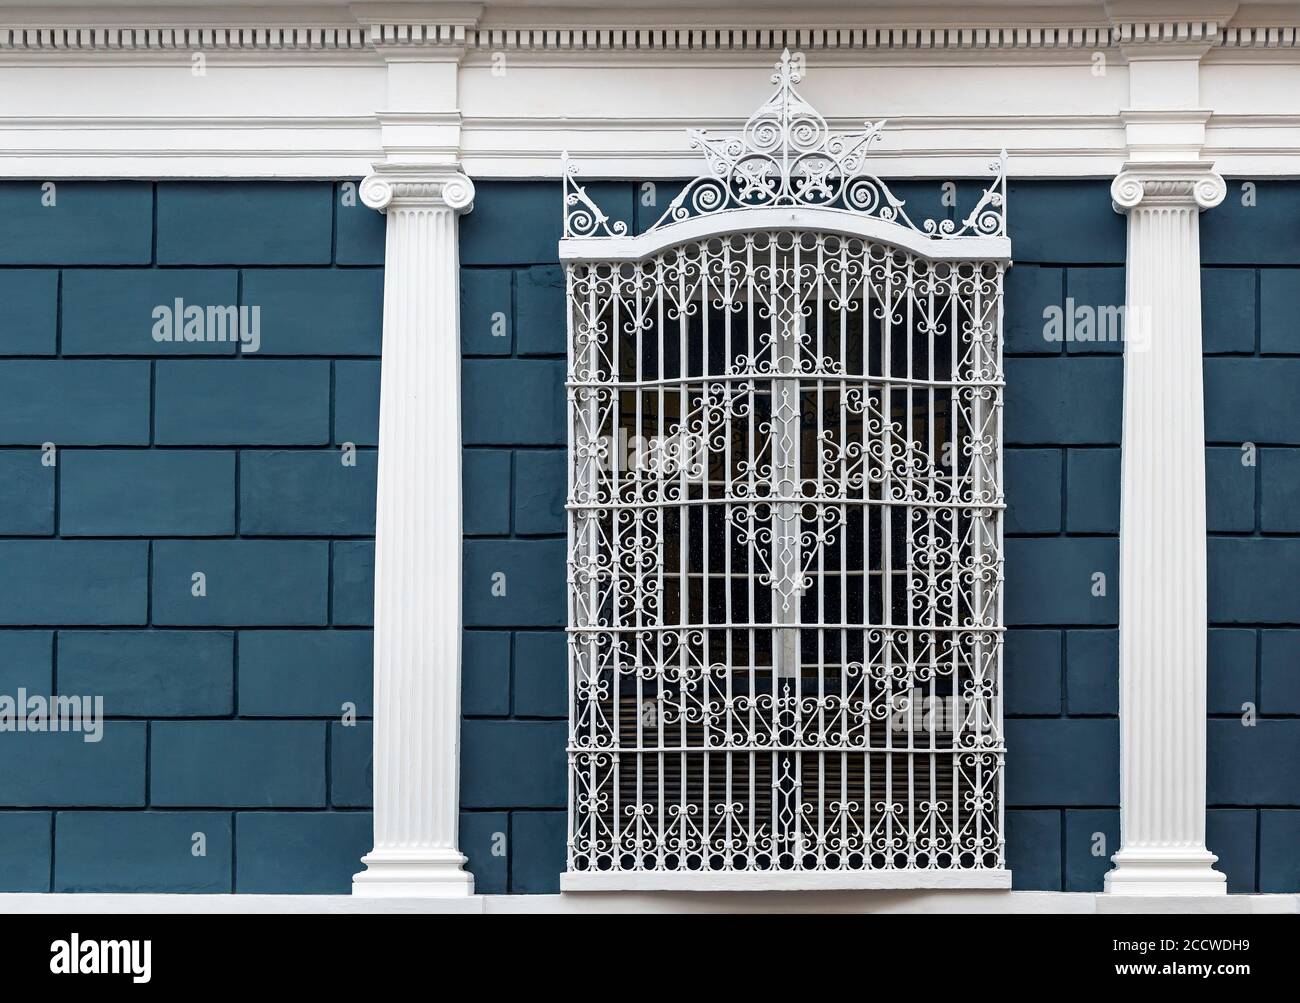 Colonial style facade with columns and wrought iron ornate window, Trujillo, Peru. Stock Photo